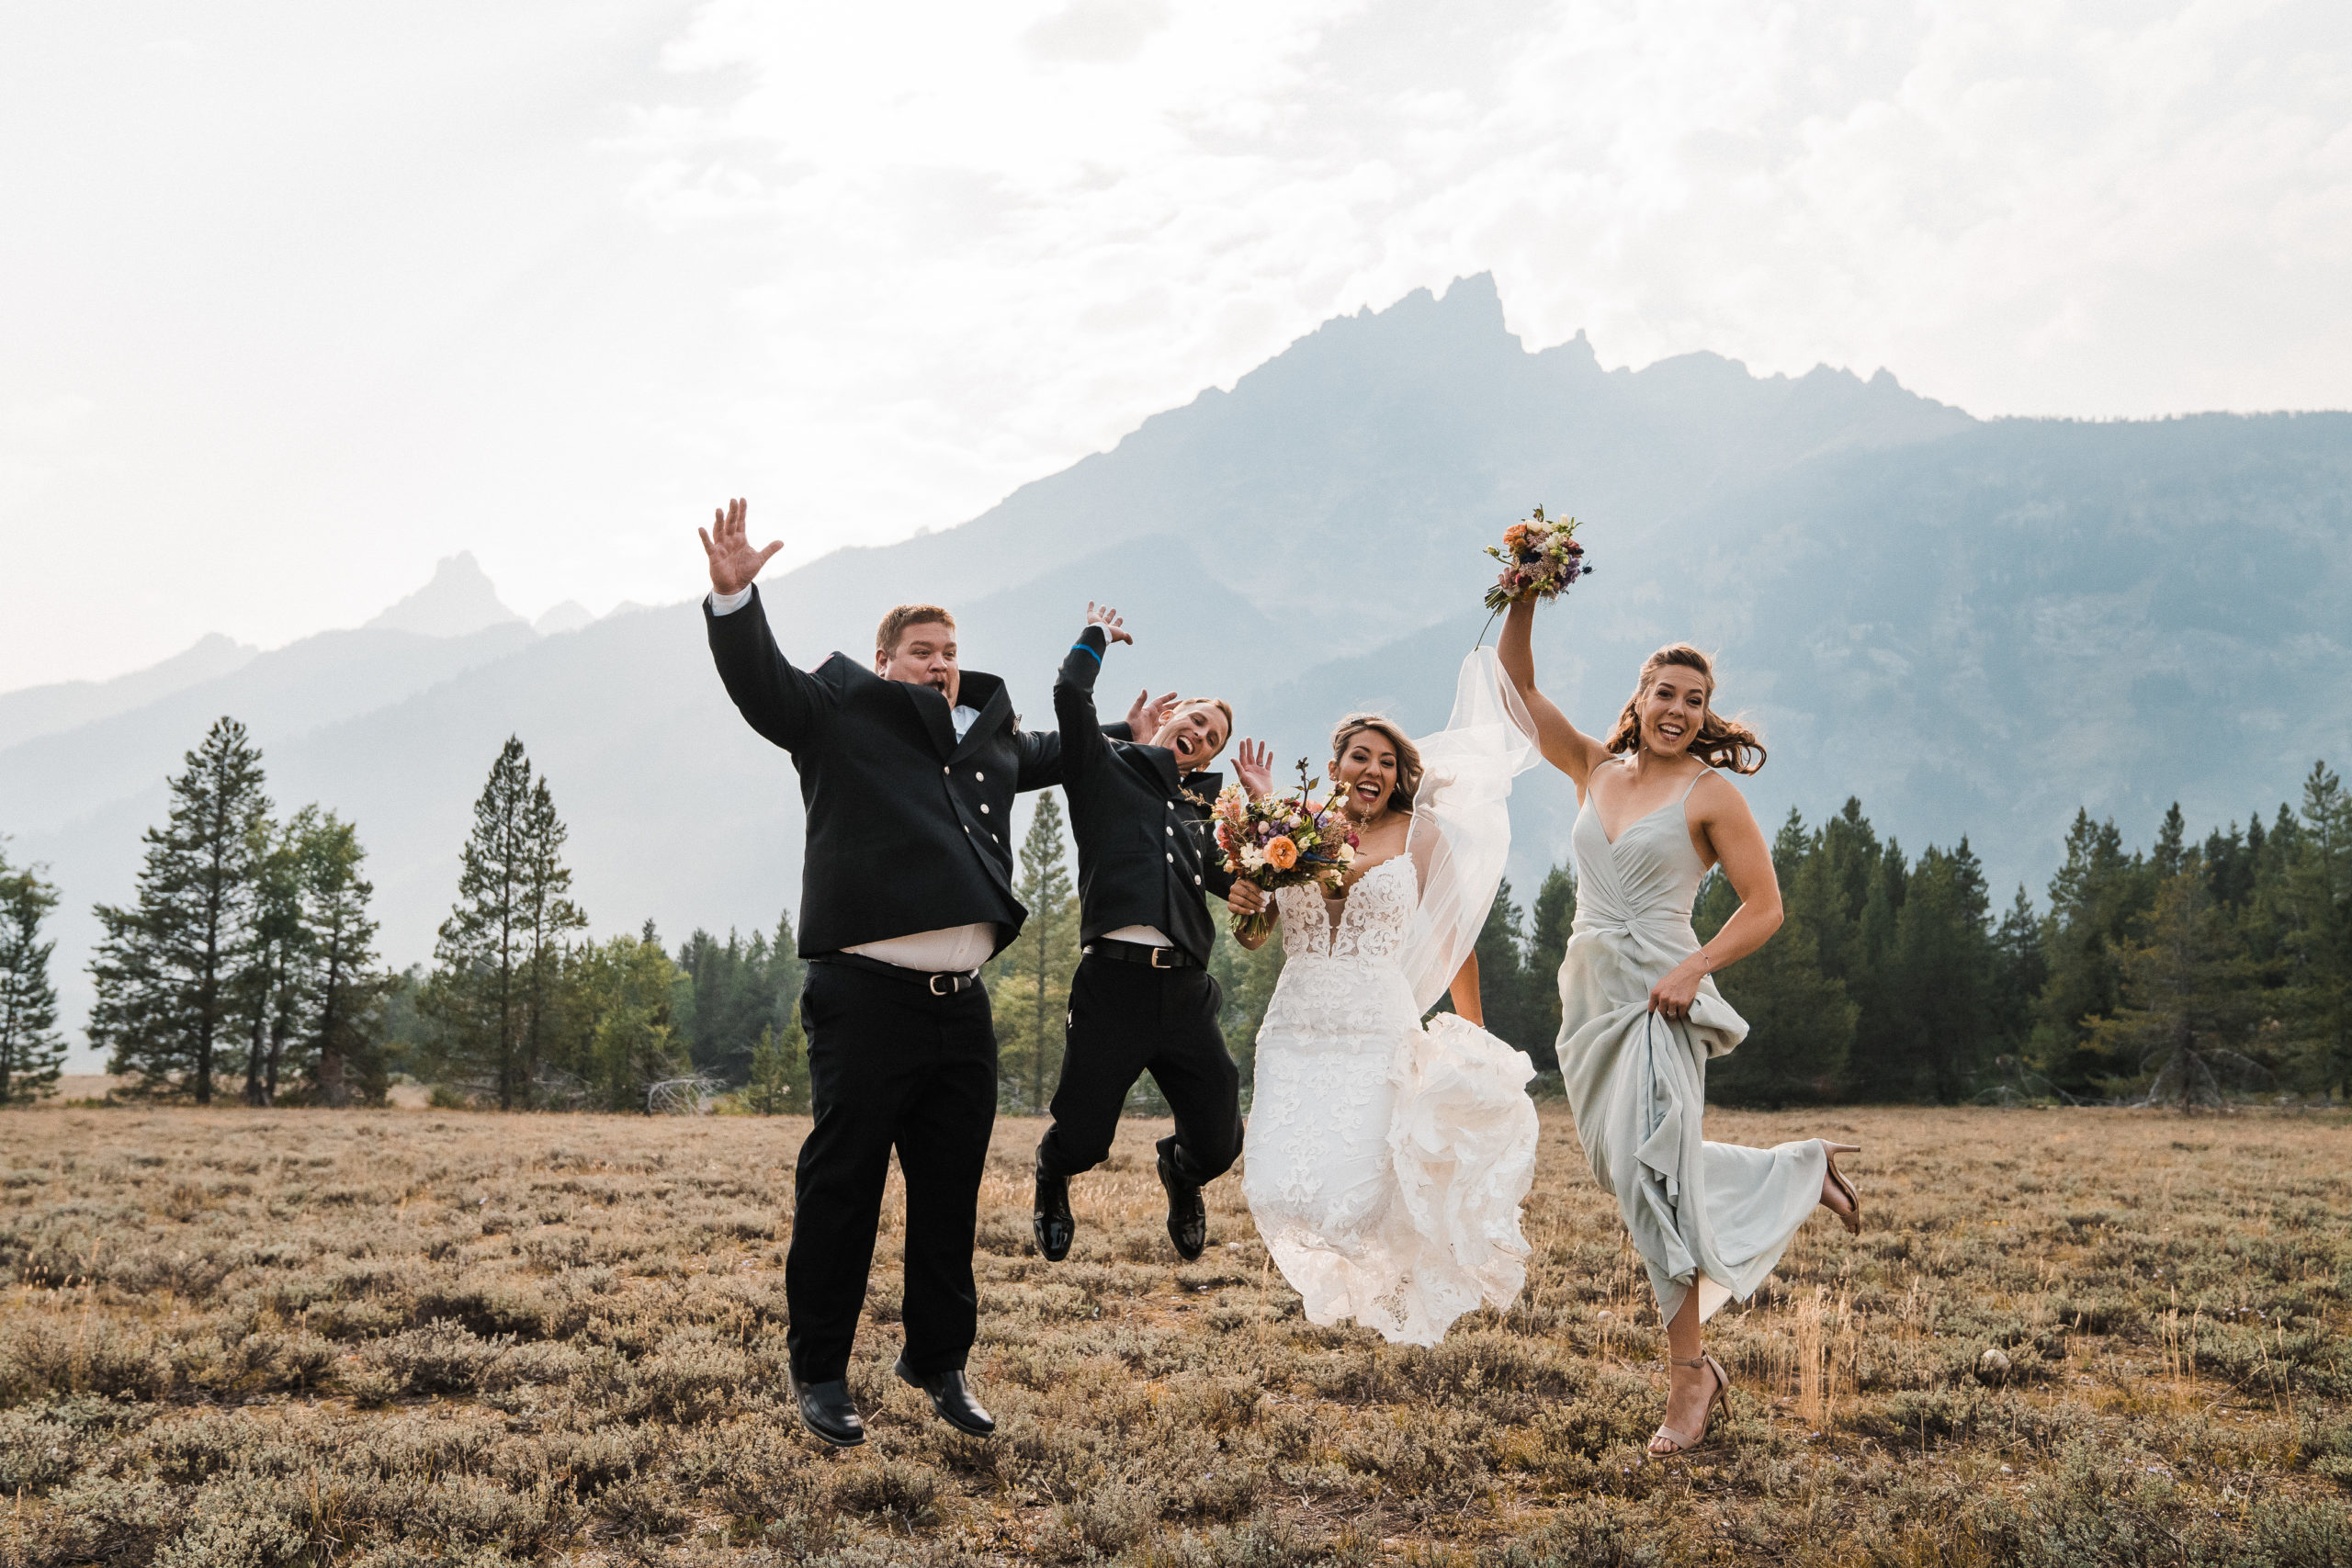 Bride, groom, best man, and maid of honor jumping into the air after small summer wedding ceremony